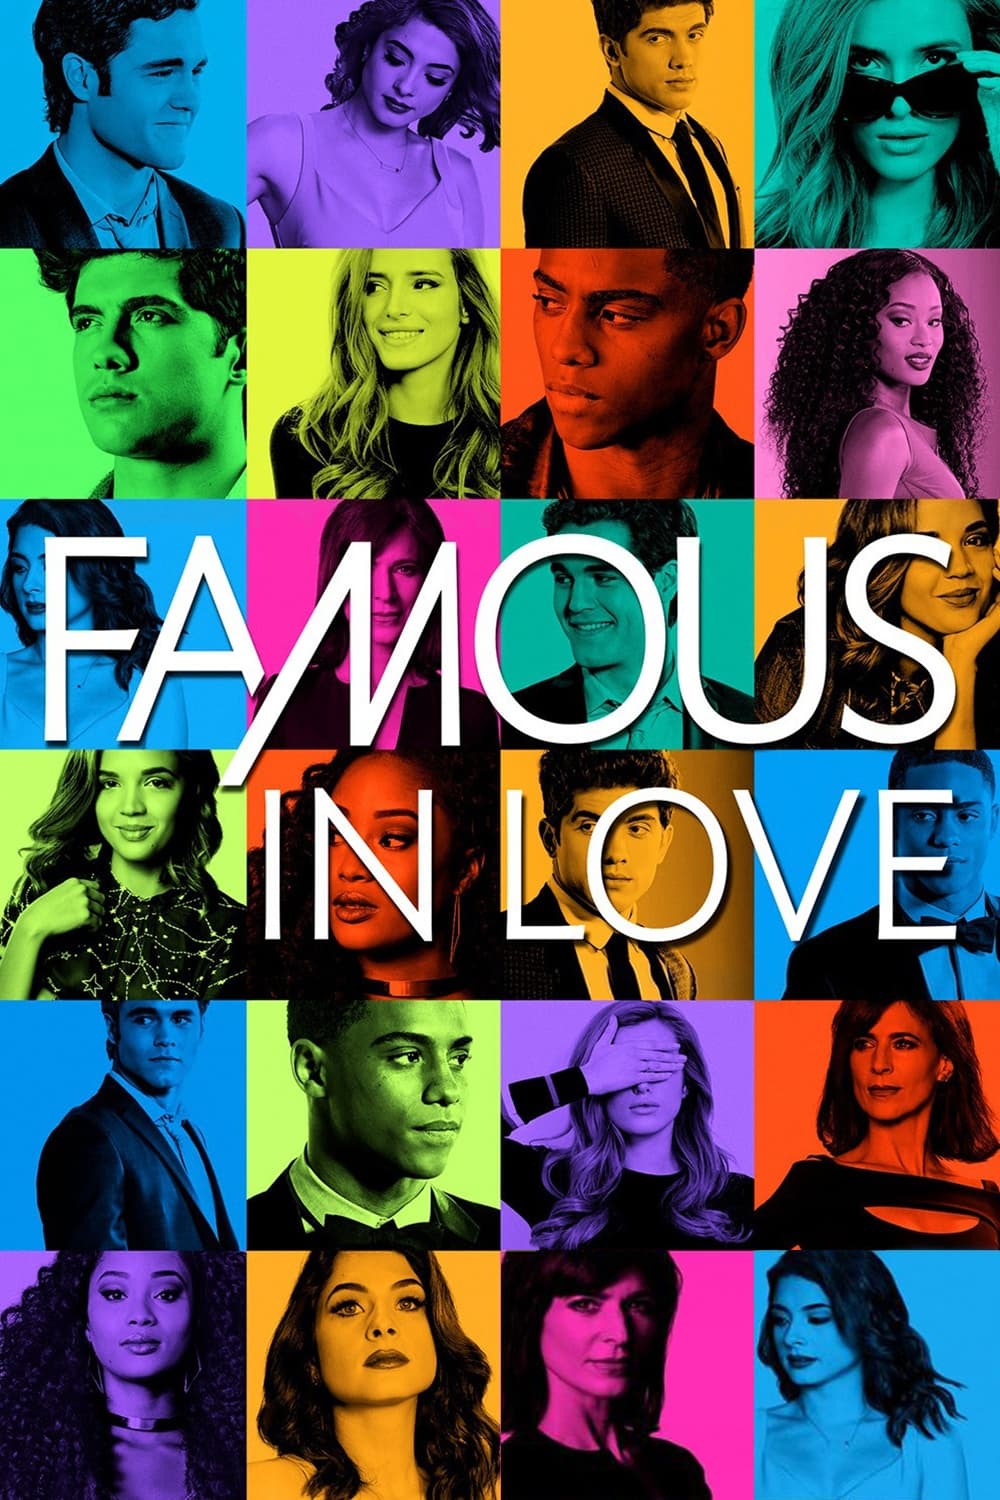 Famous in Love (2017)